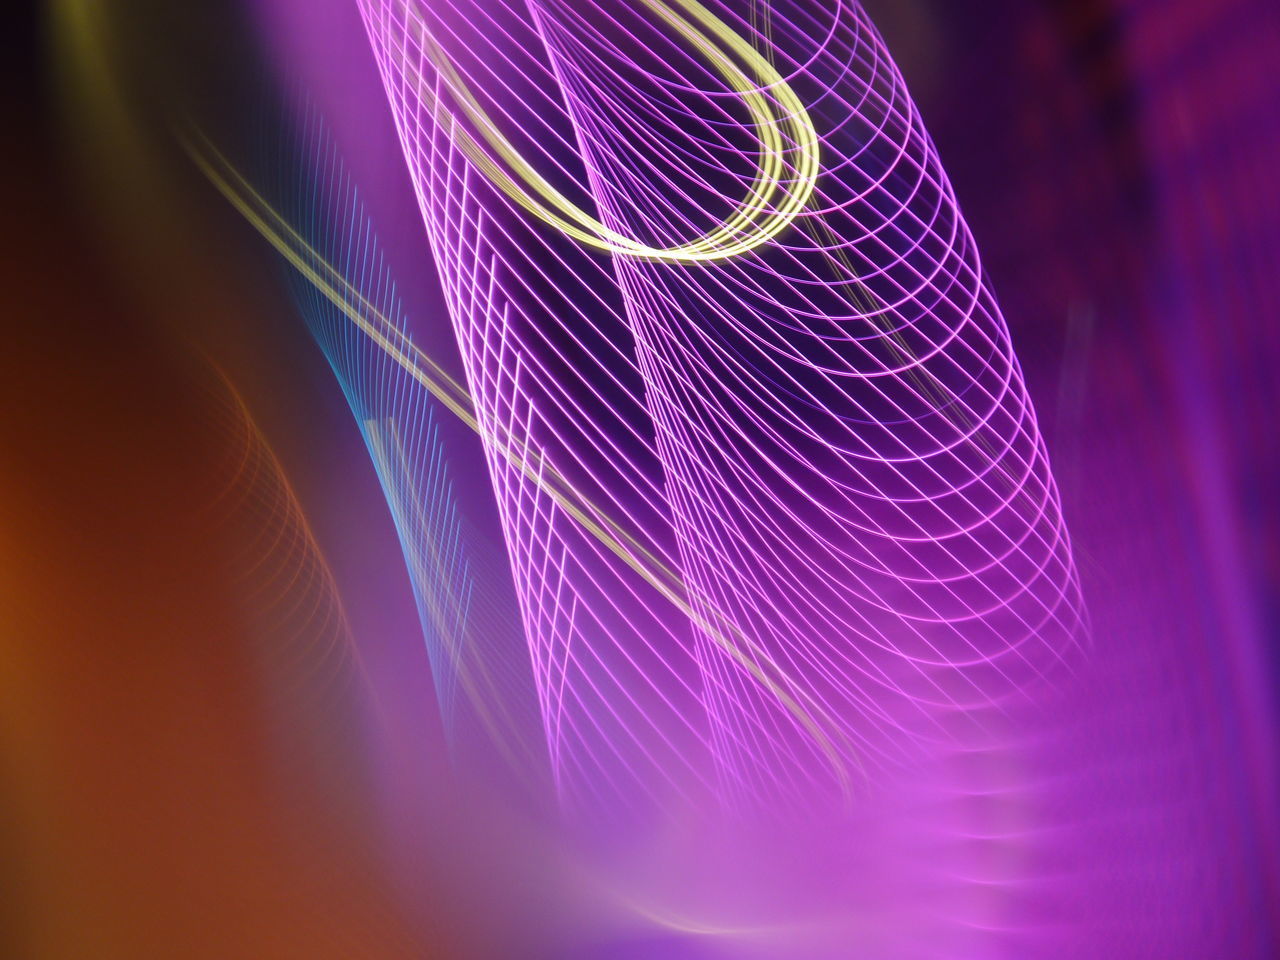 CLOSE-UP OF LIGHT PAINTING ON PURPLE BACKGROUND